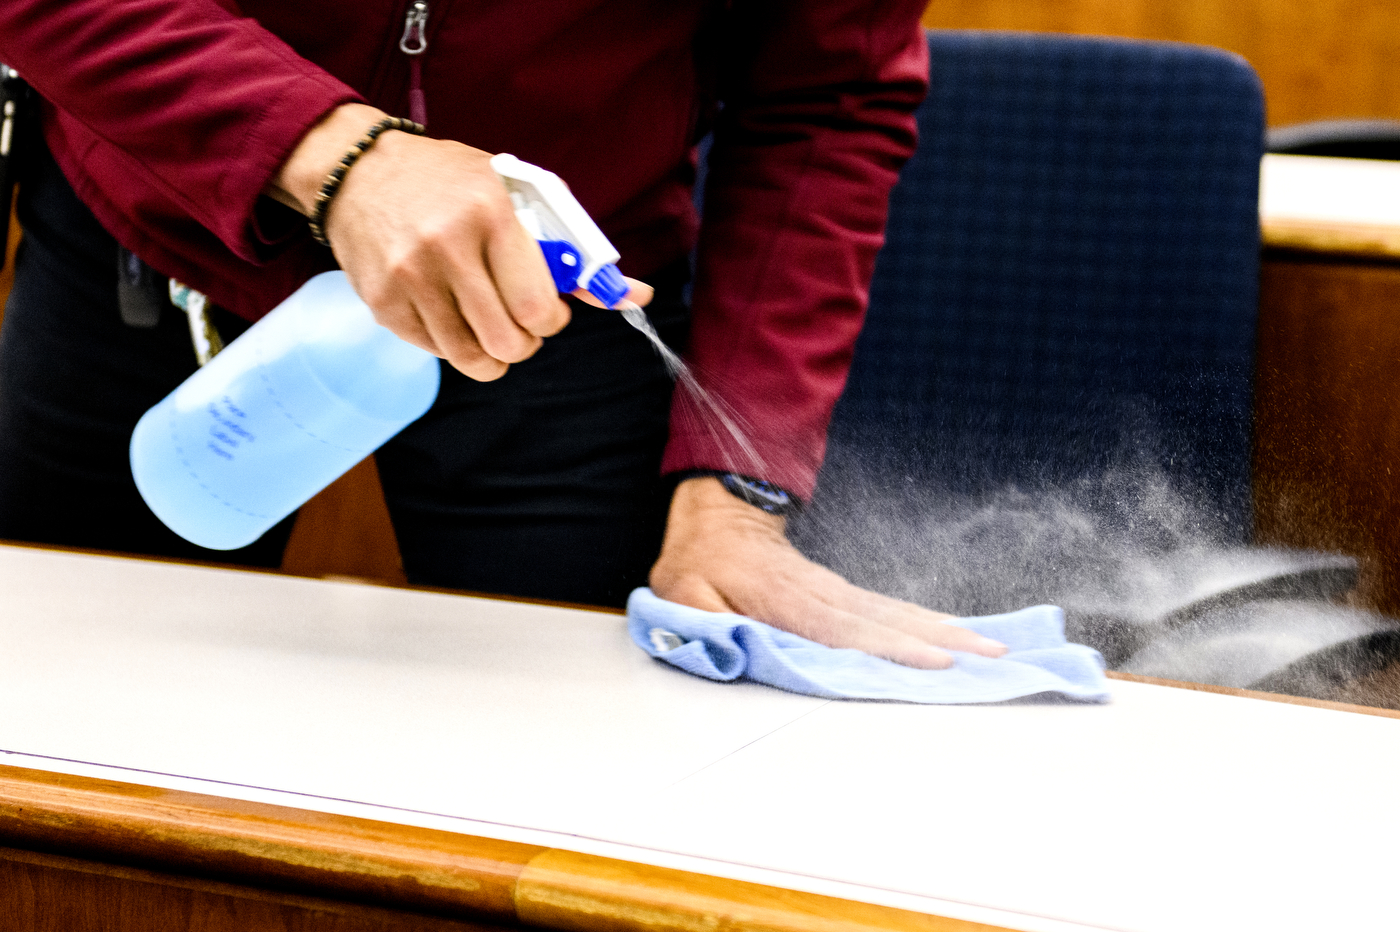 Spraying a desk with cleaner